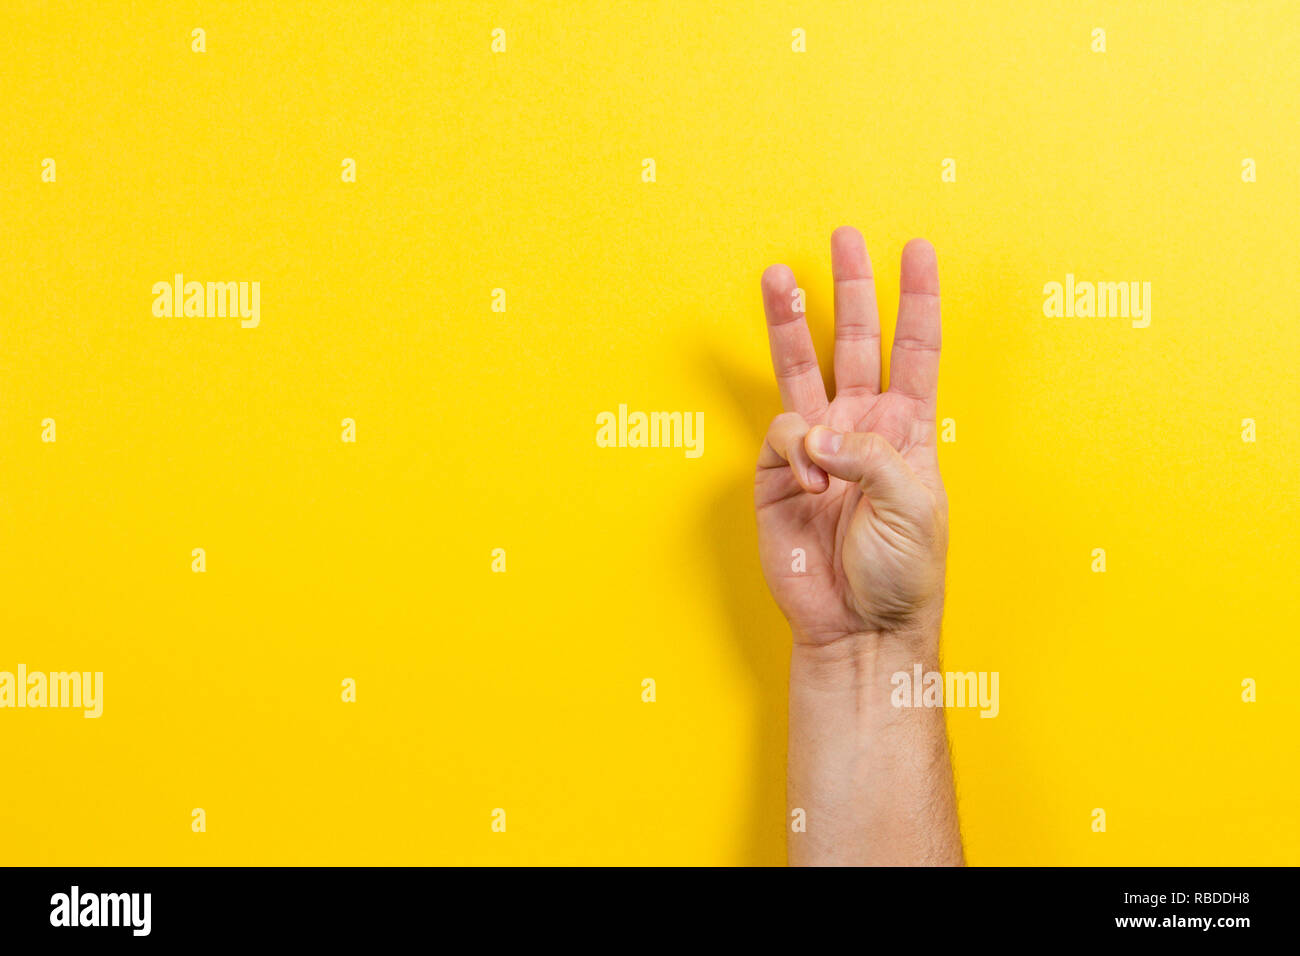 Man hand showing three fingers on yellow background. Number two symbol Stock Photo